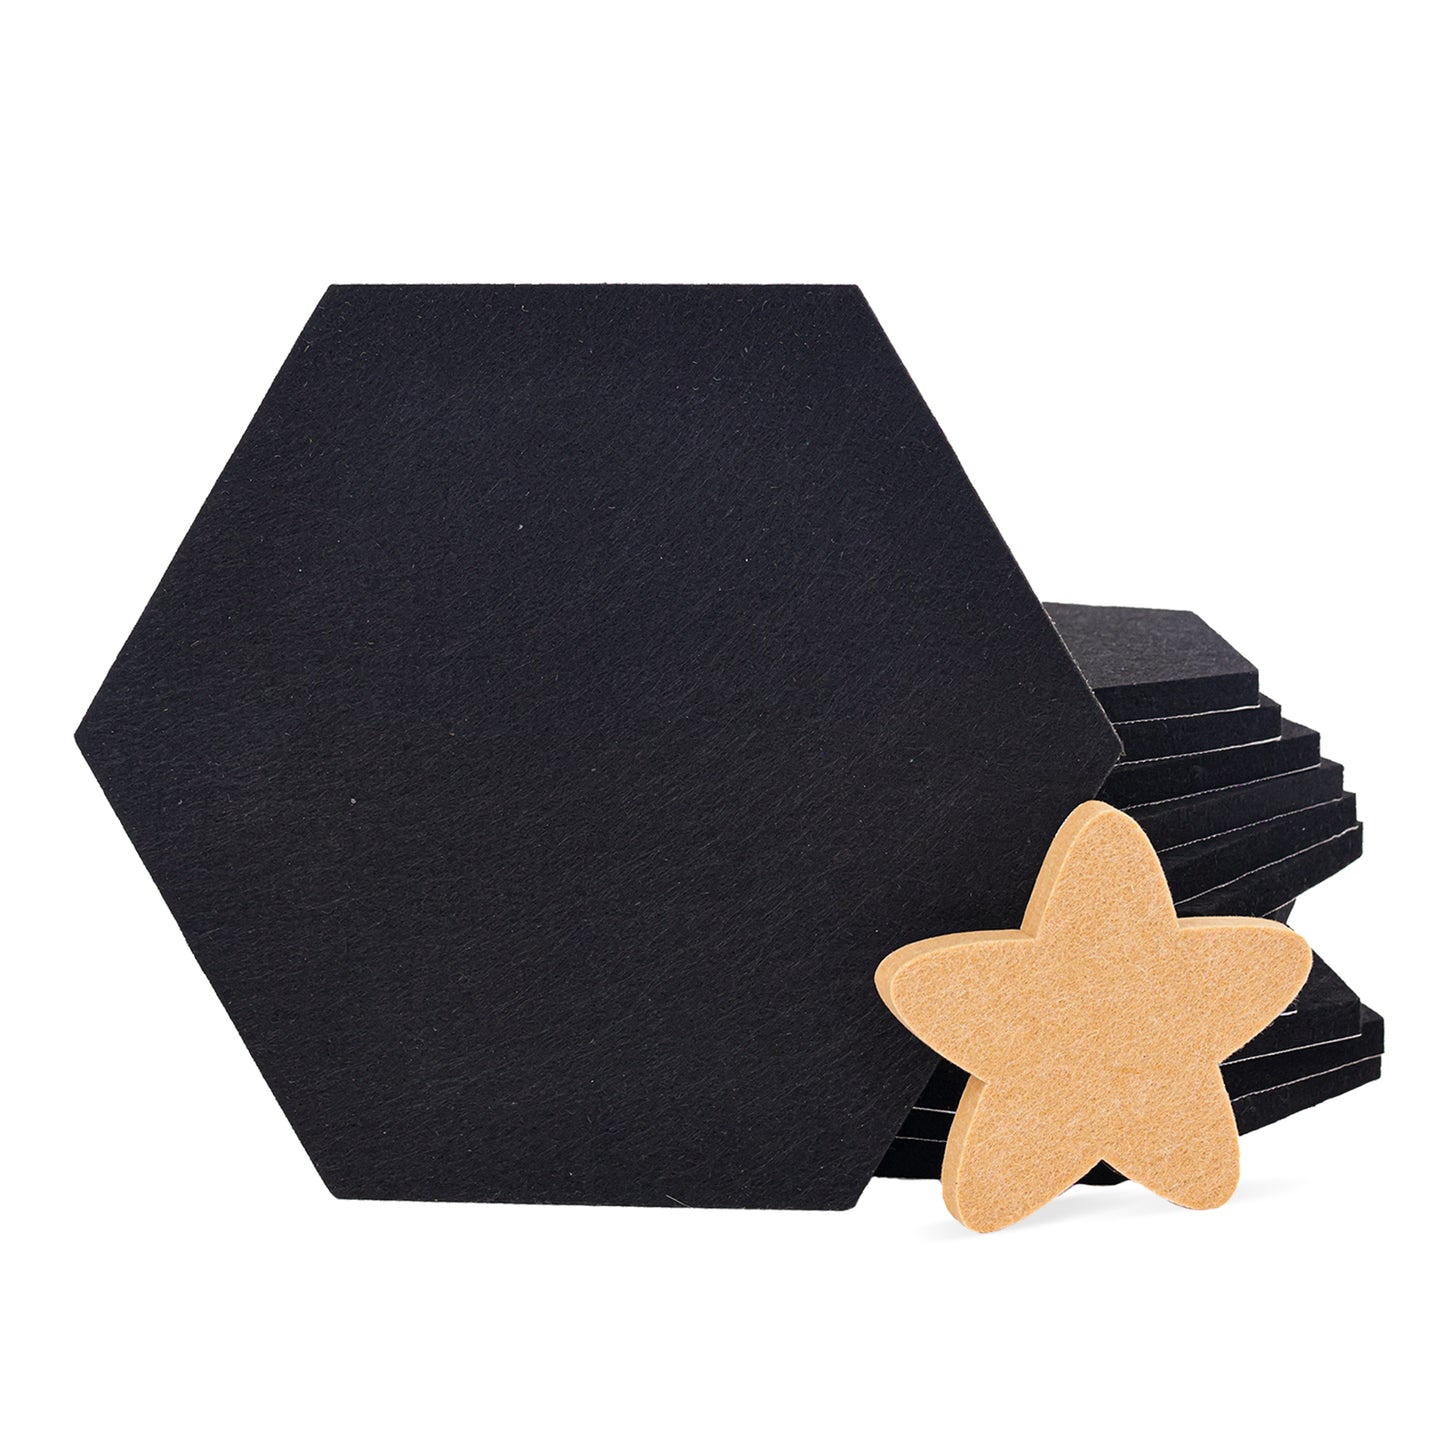 12 Pack Self-Adhesive Hexagon Sound Proof Foam Panels - 12x10 inches